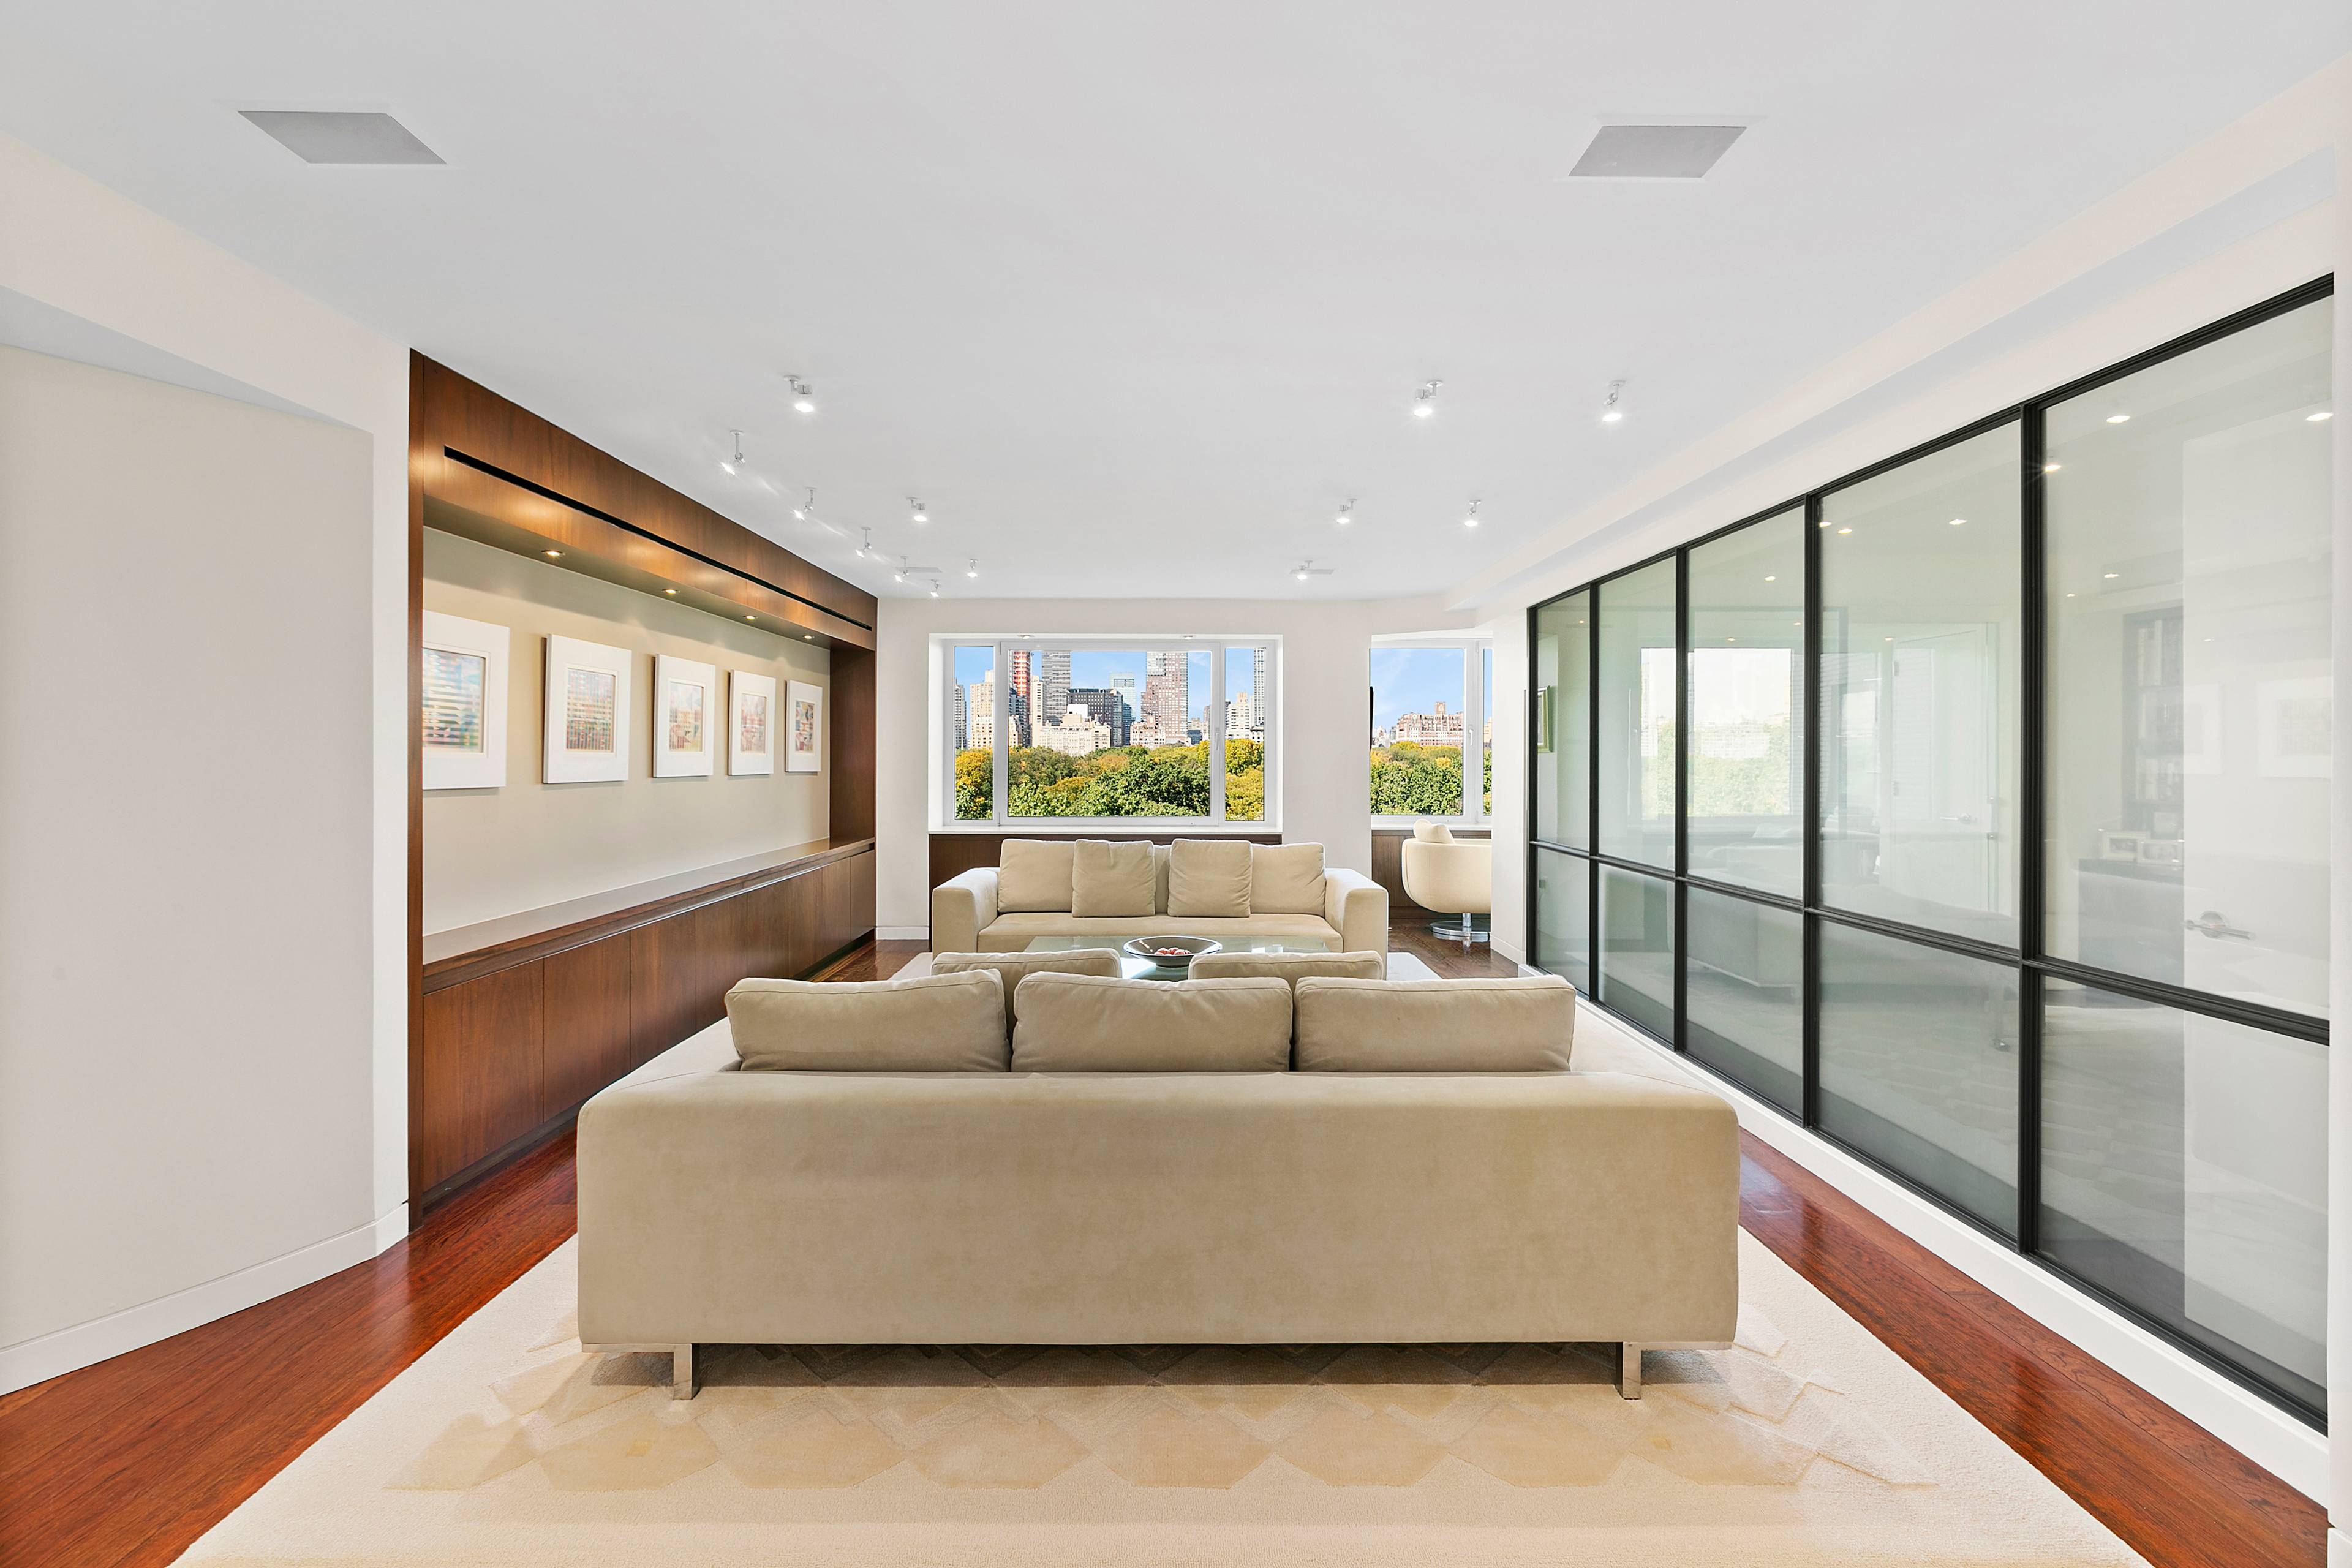 This massive 2, 910 square foot home on Fifth Avenue with direct Central Park Views features over 2 million spent on renovations and a Separate bonus room with full bathroom ...